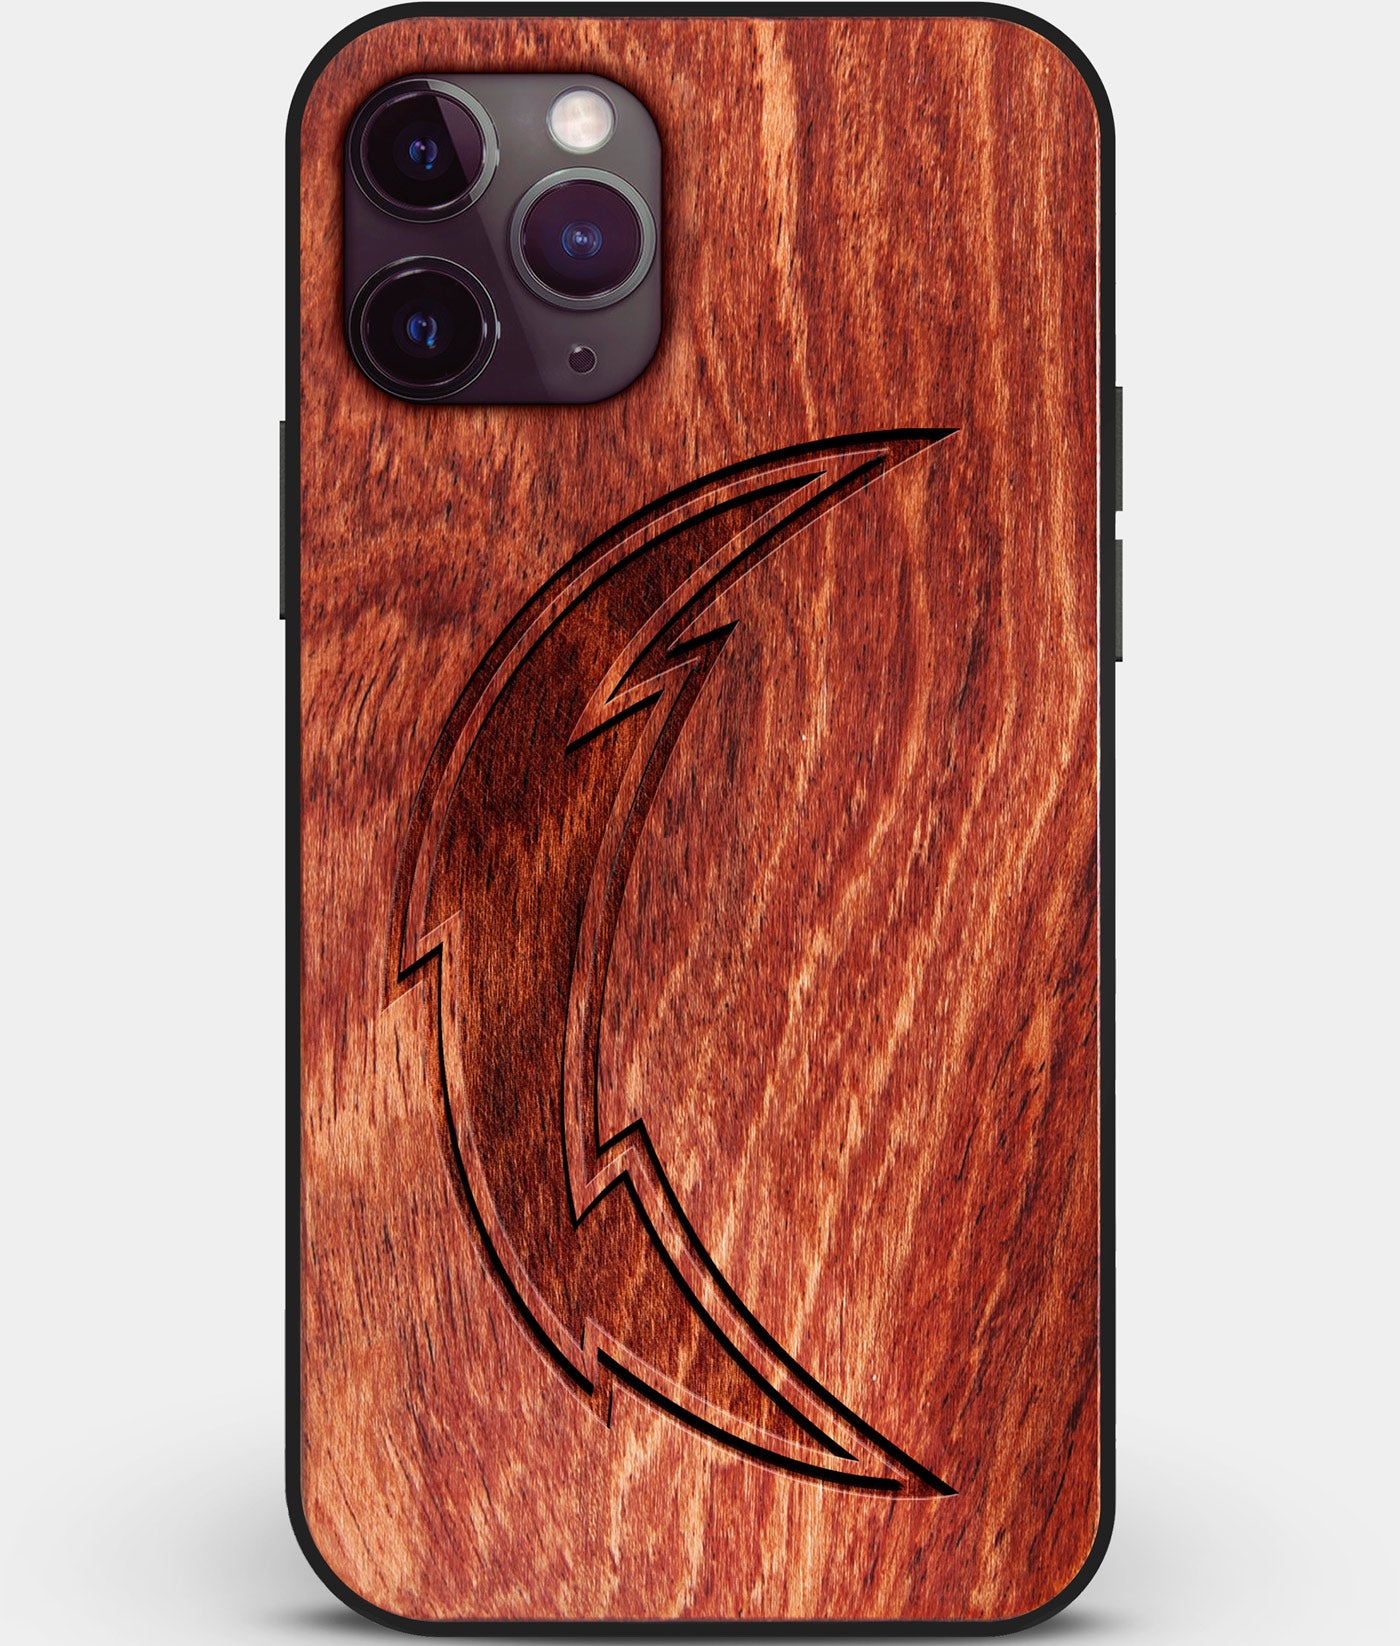 Custom Carved Wood Los Angeles Chargers iPhone 11 Pro Max Case | Personalized Mahogany Wood Los Angeles Chargers Cover, Birthday Gift, Gifts For Him, Monogrammed Gift For Fan | by Engraved In Nature